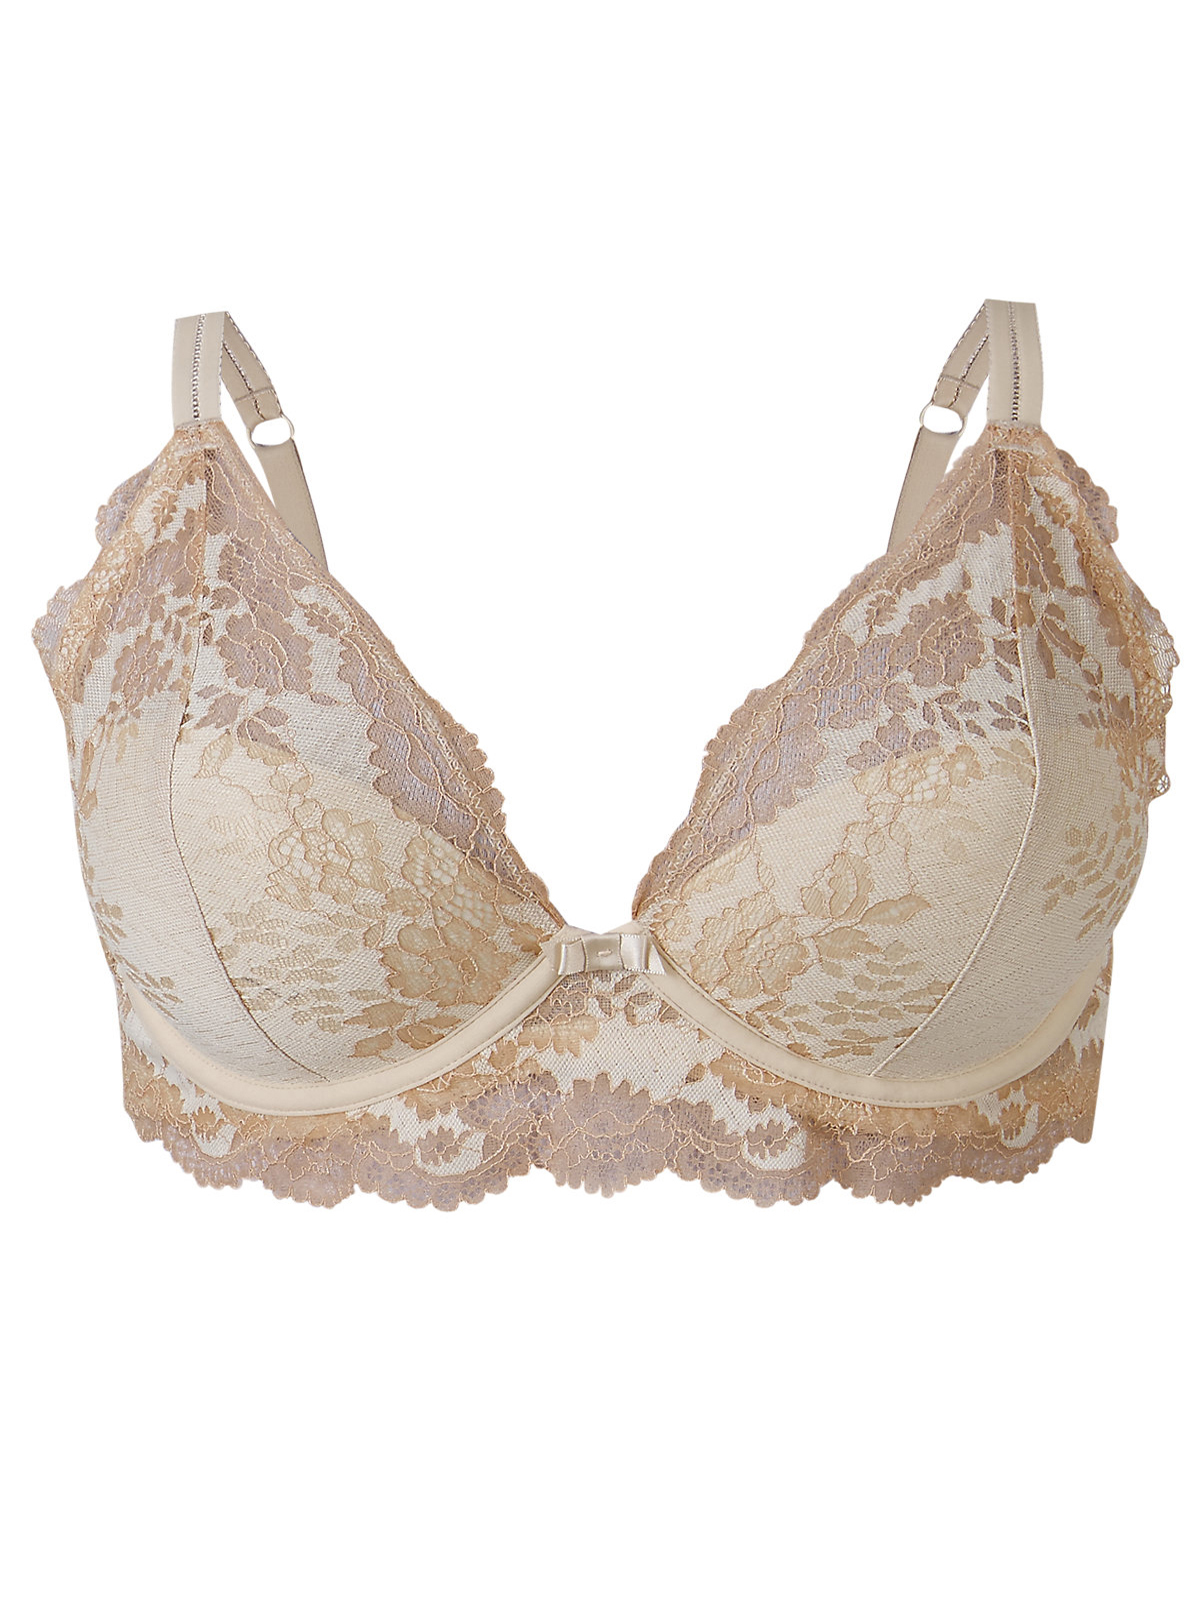 Marks and Spencer - - M&5 ASSORTED Underwired Plain & Lace Bras - Size ...